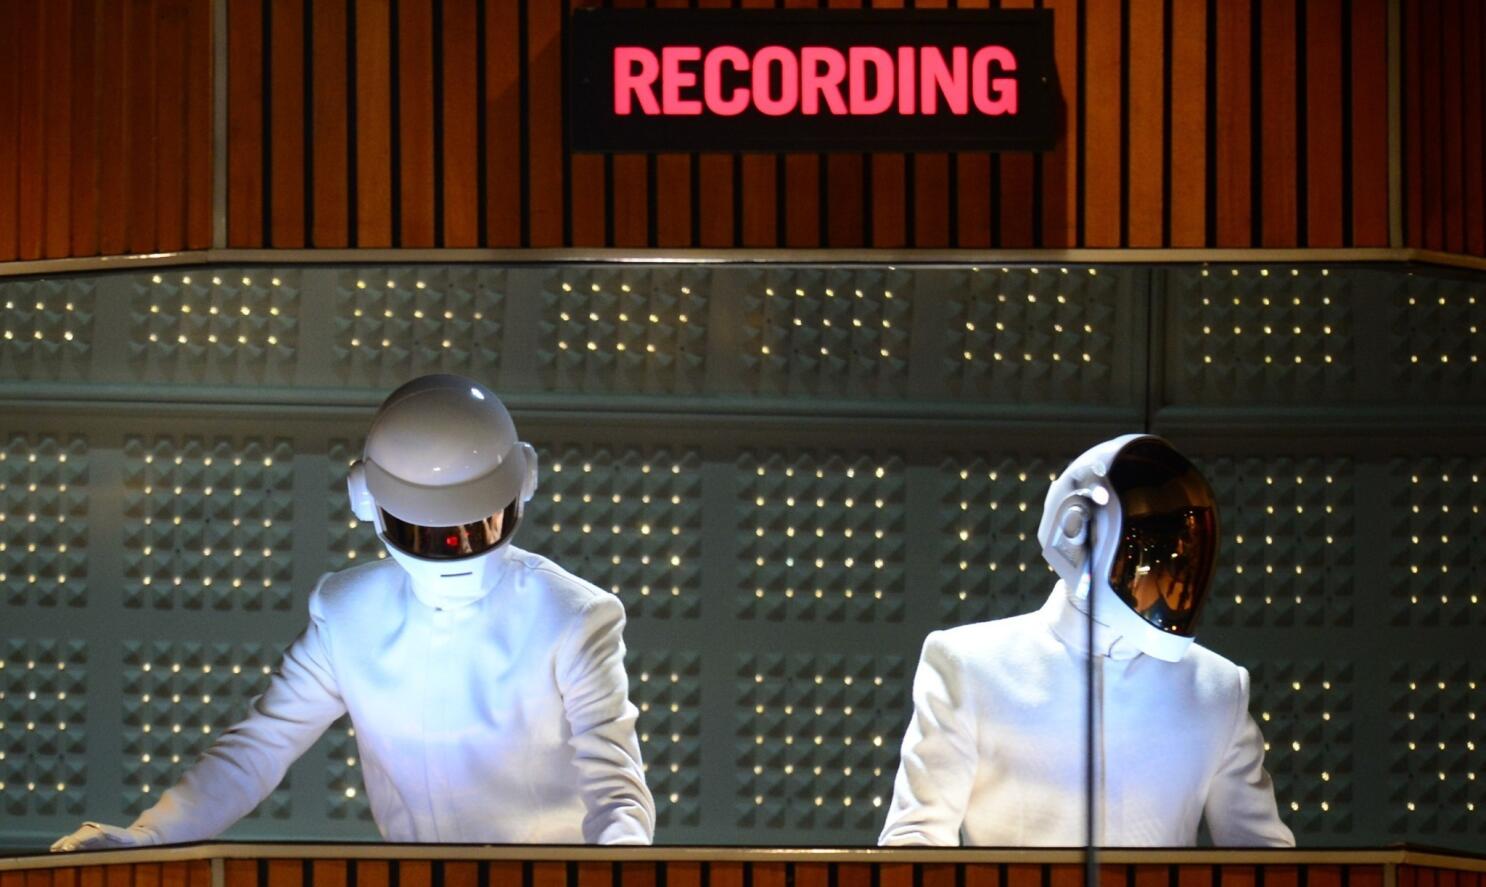 Daft Punk Get Lucky  Pima County Public Library